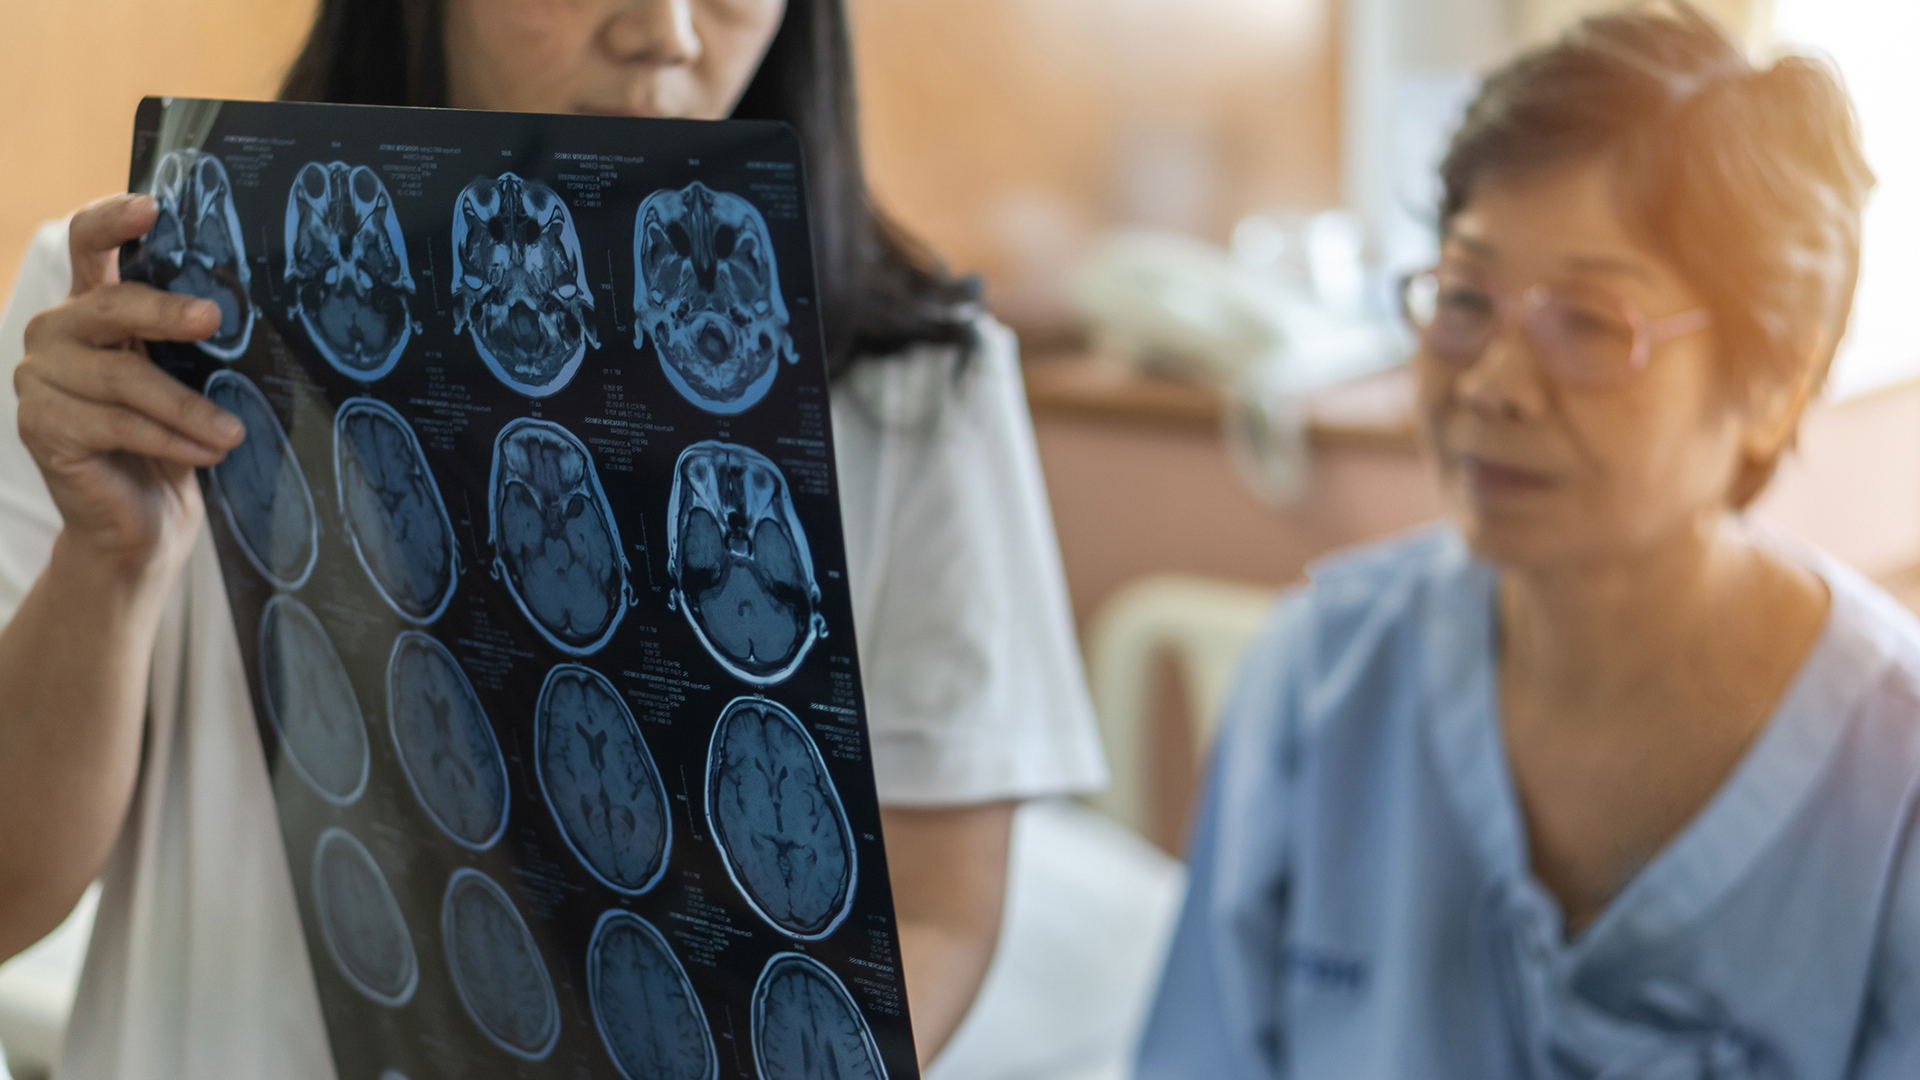 Featured image for “An Alzheimer’s Disease Diagnosis: Tips for Families”